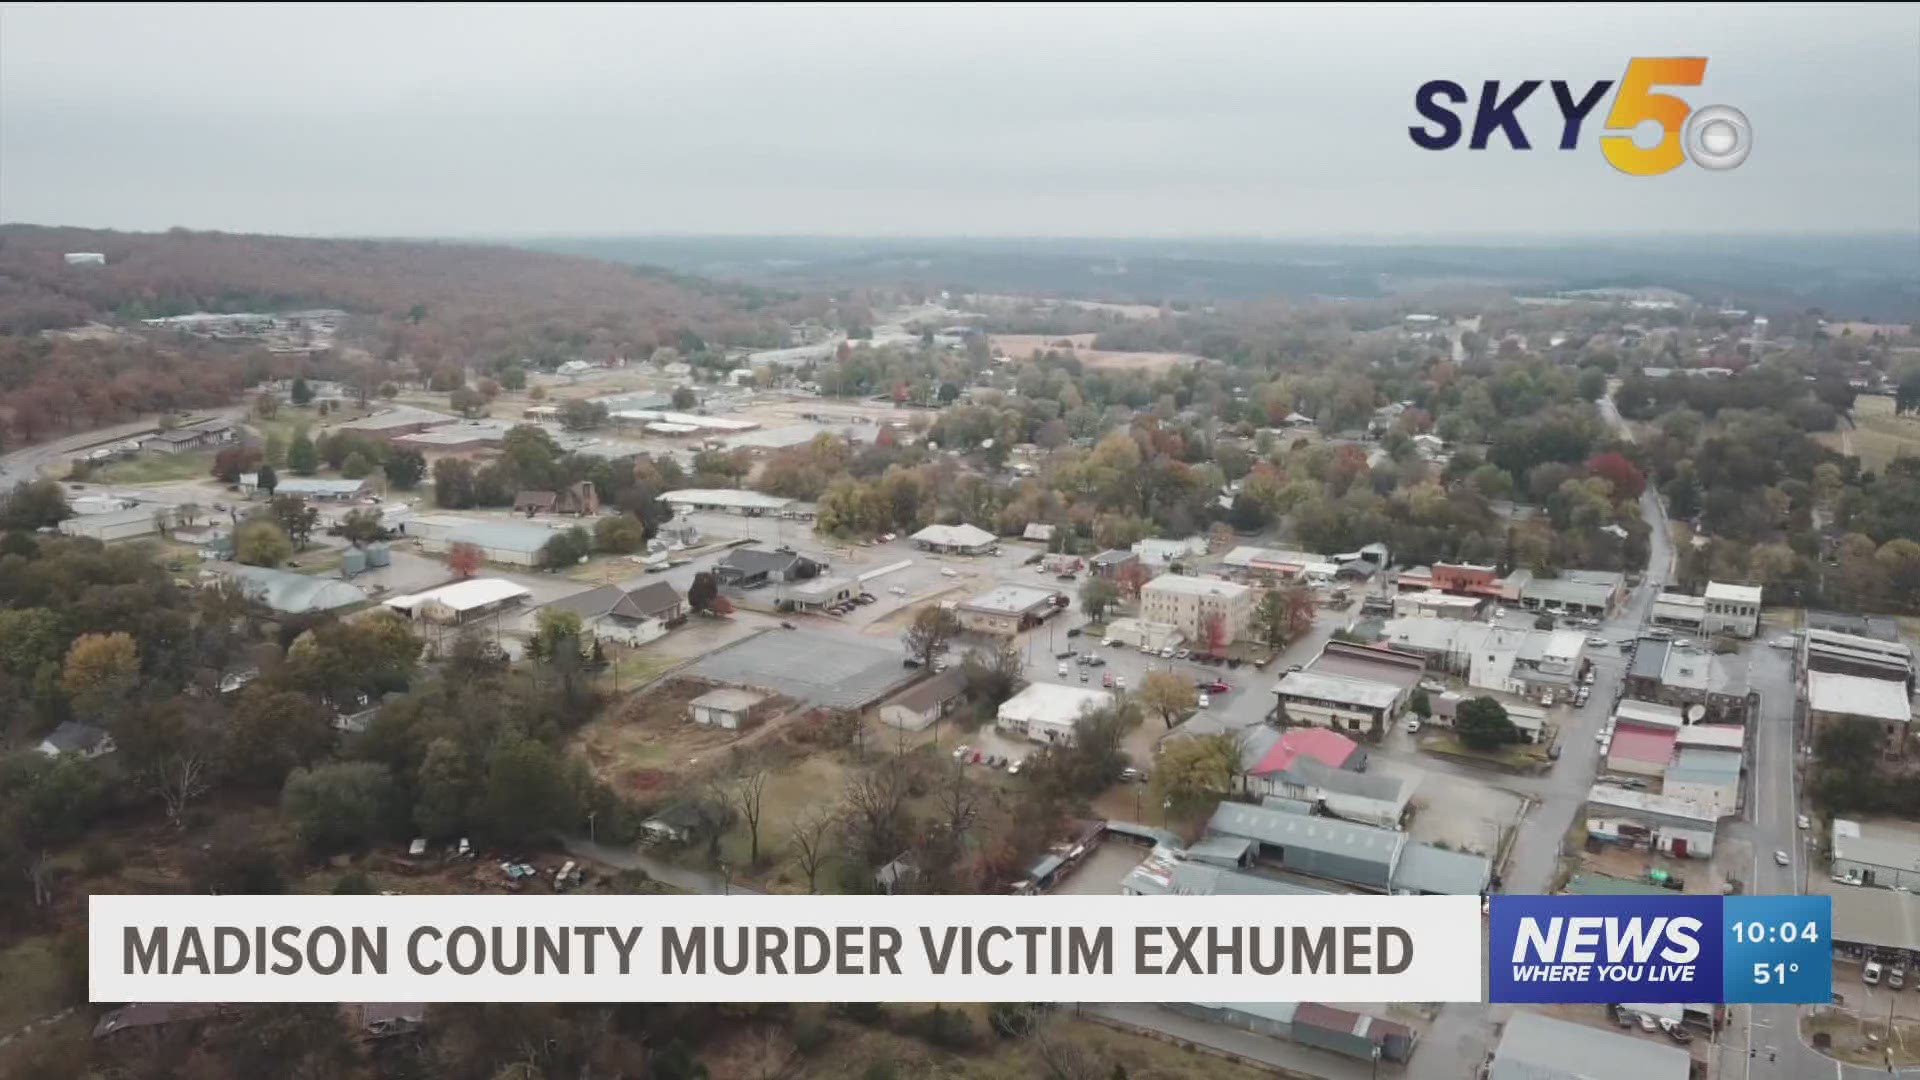 Madison County murder victim exhumed